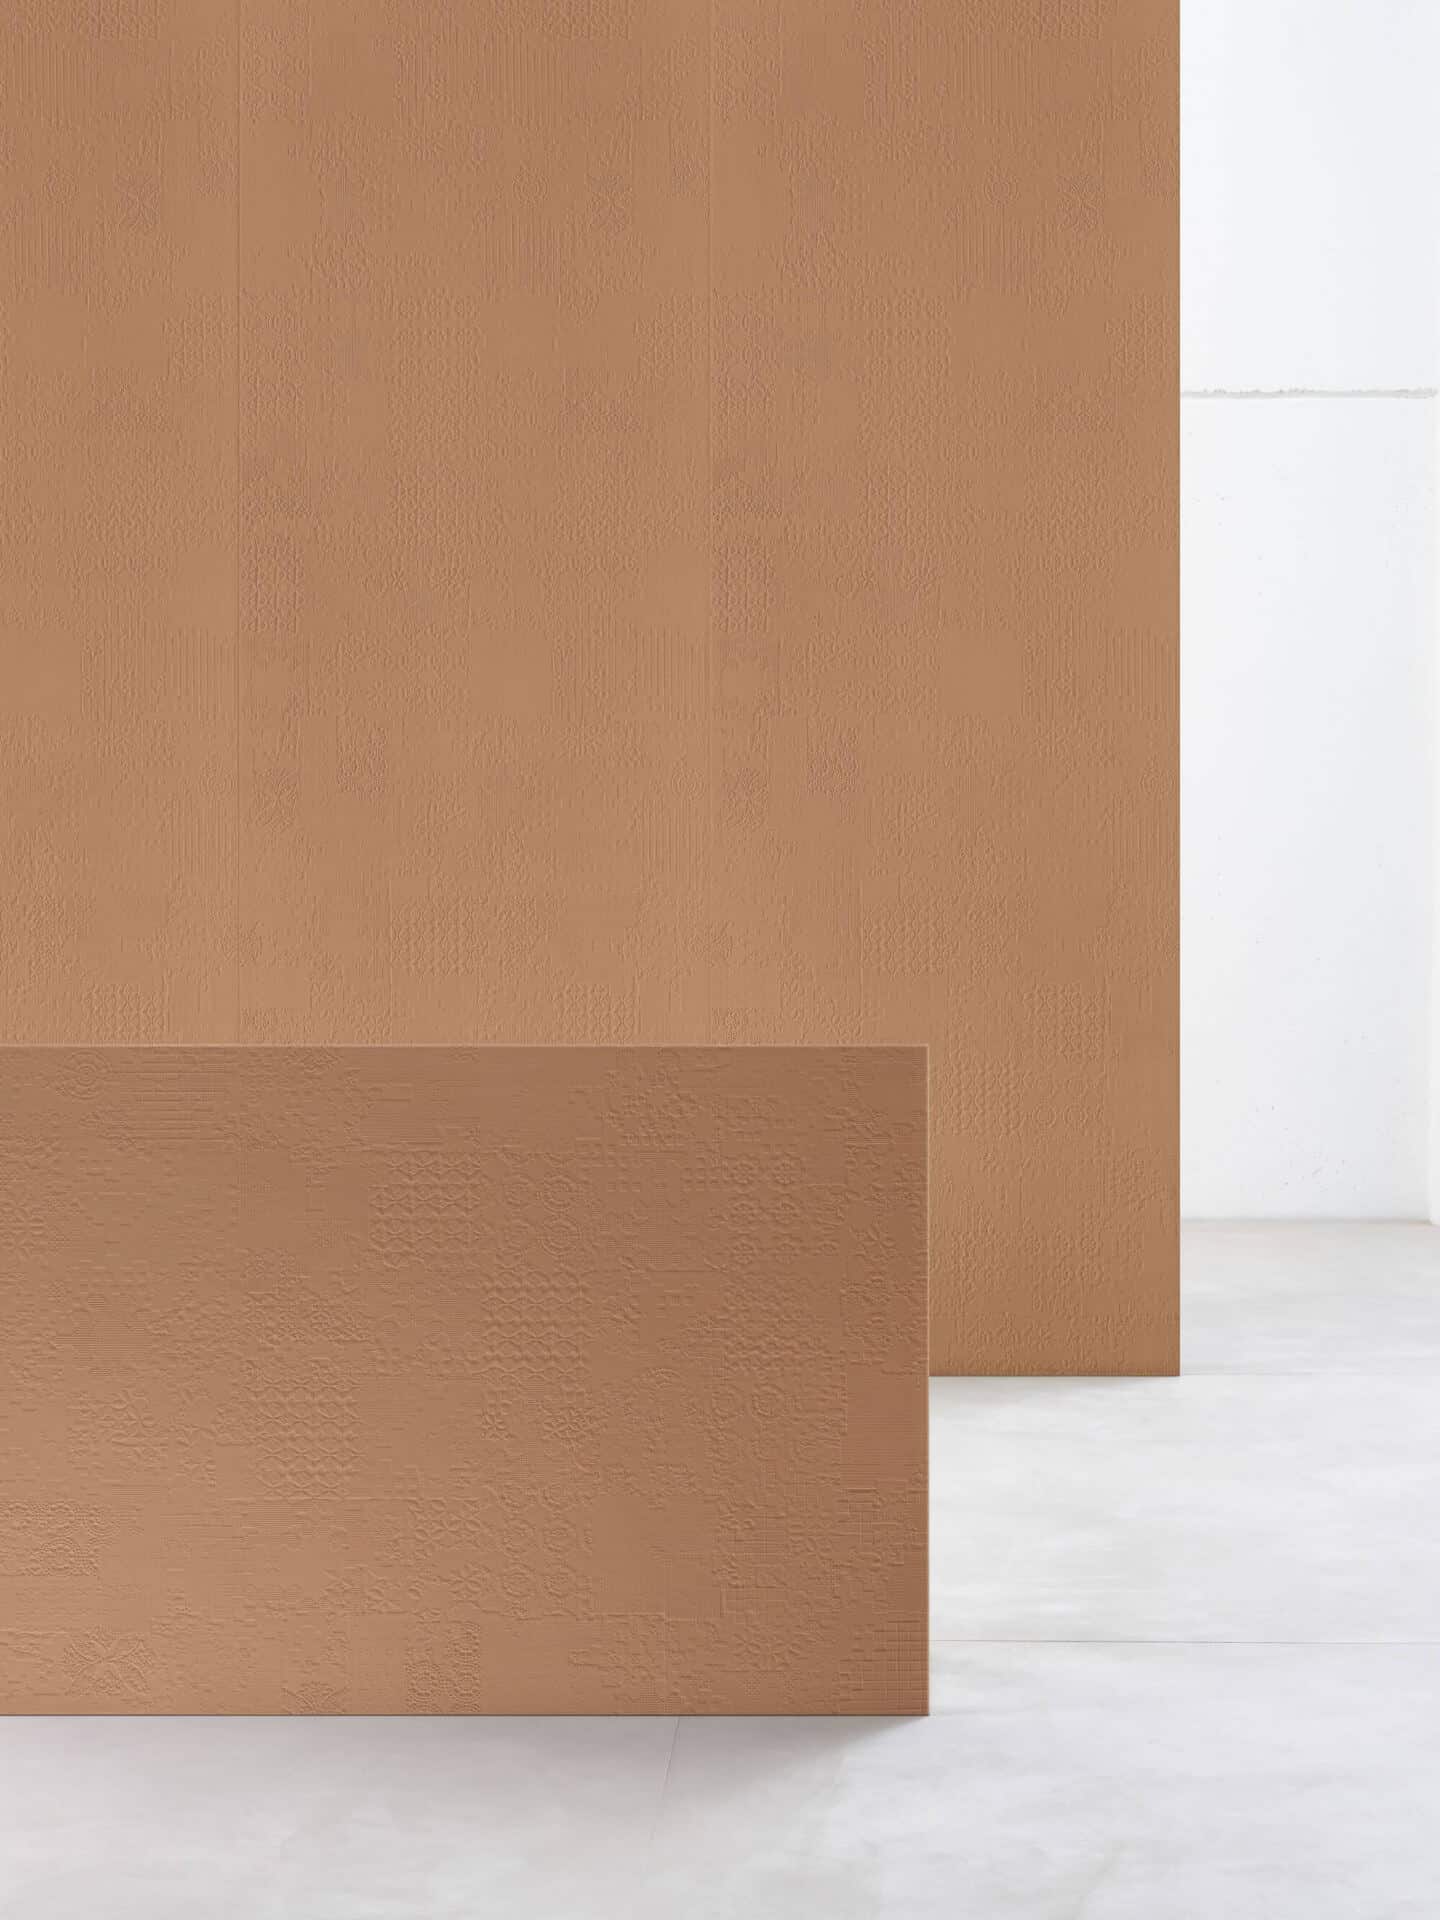 Large scale textured wall tiles from Mutina stand up and act as screens